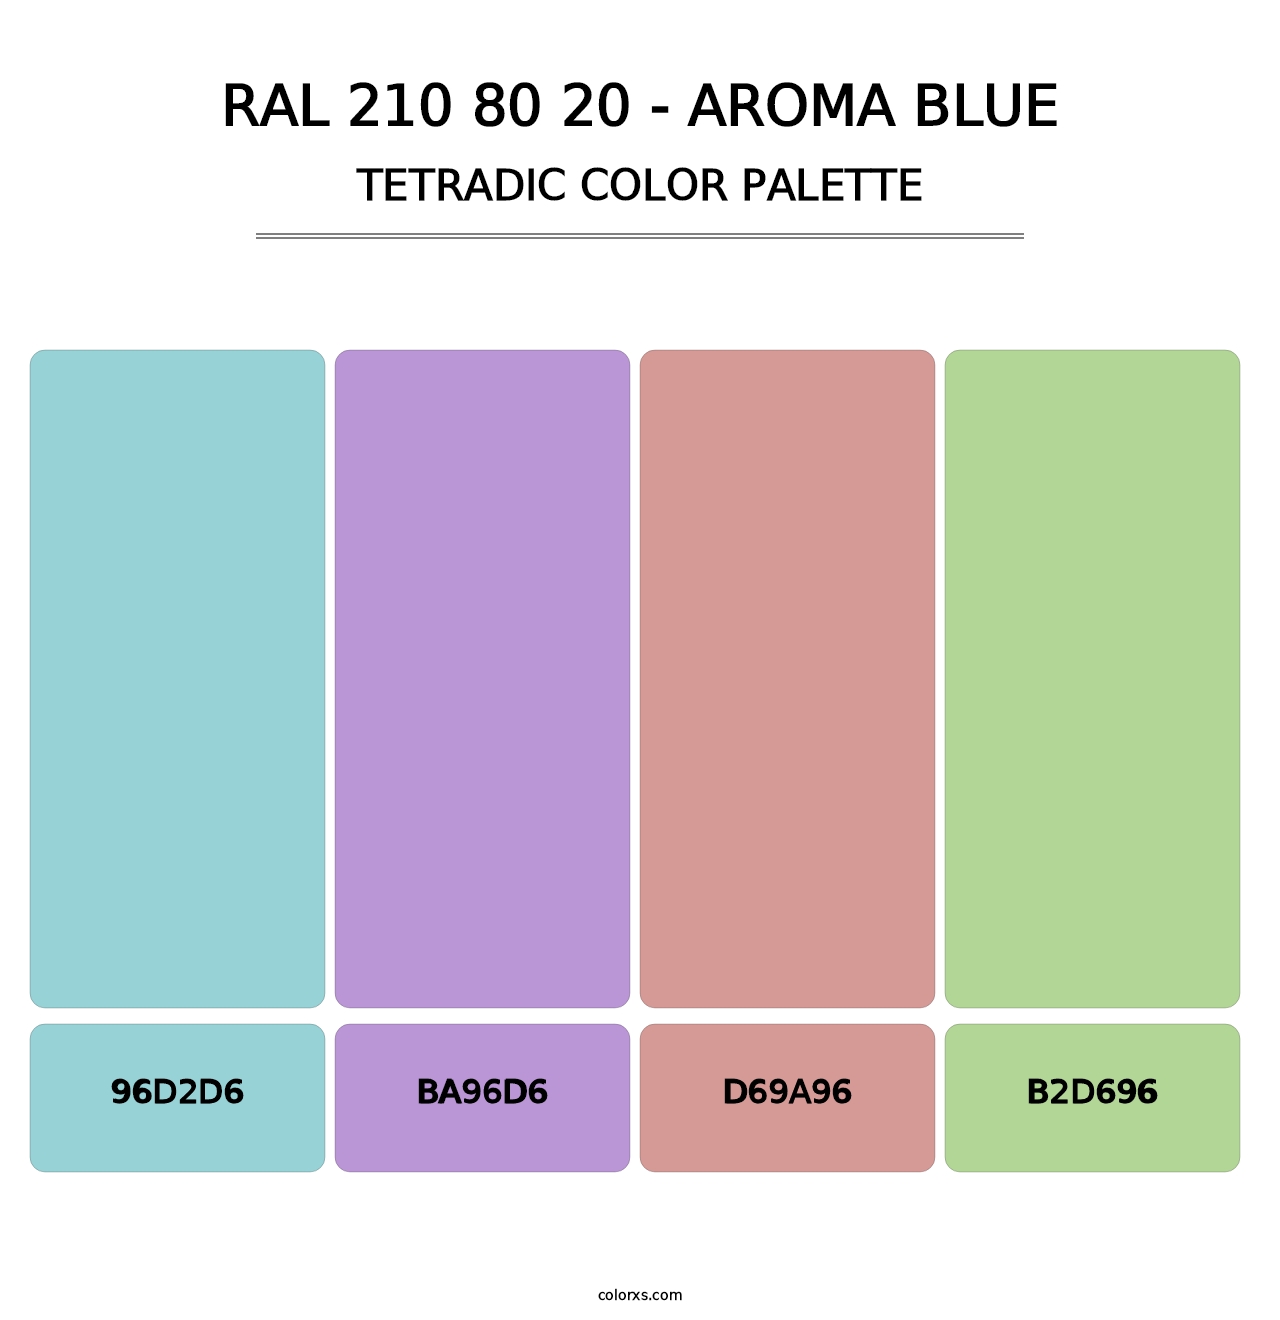 RAL 210 80 20 - Aroma Blue - Tetradic Color Palette